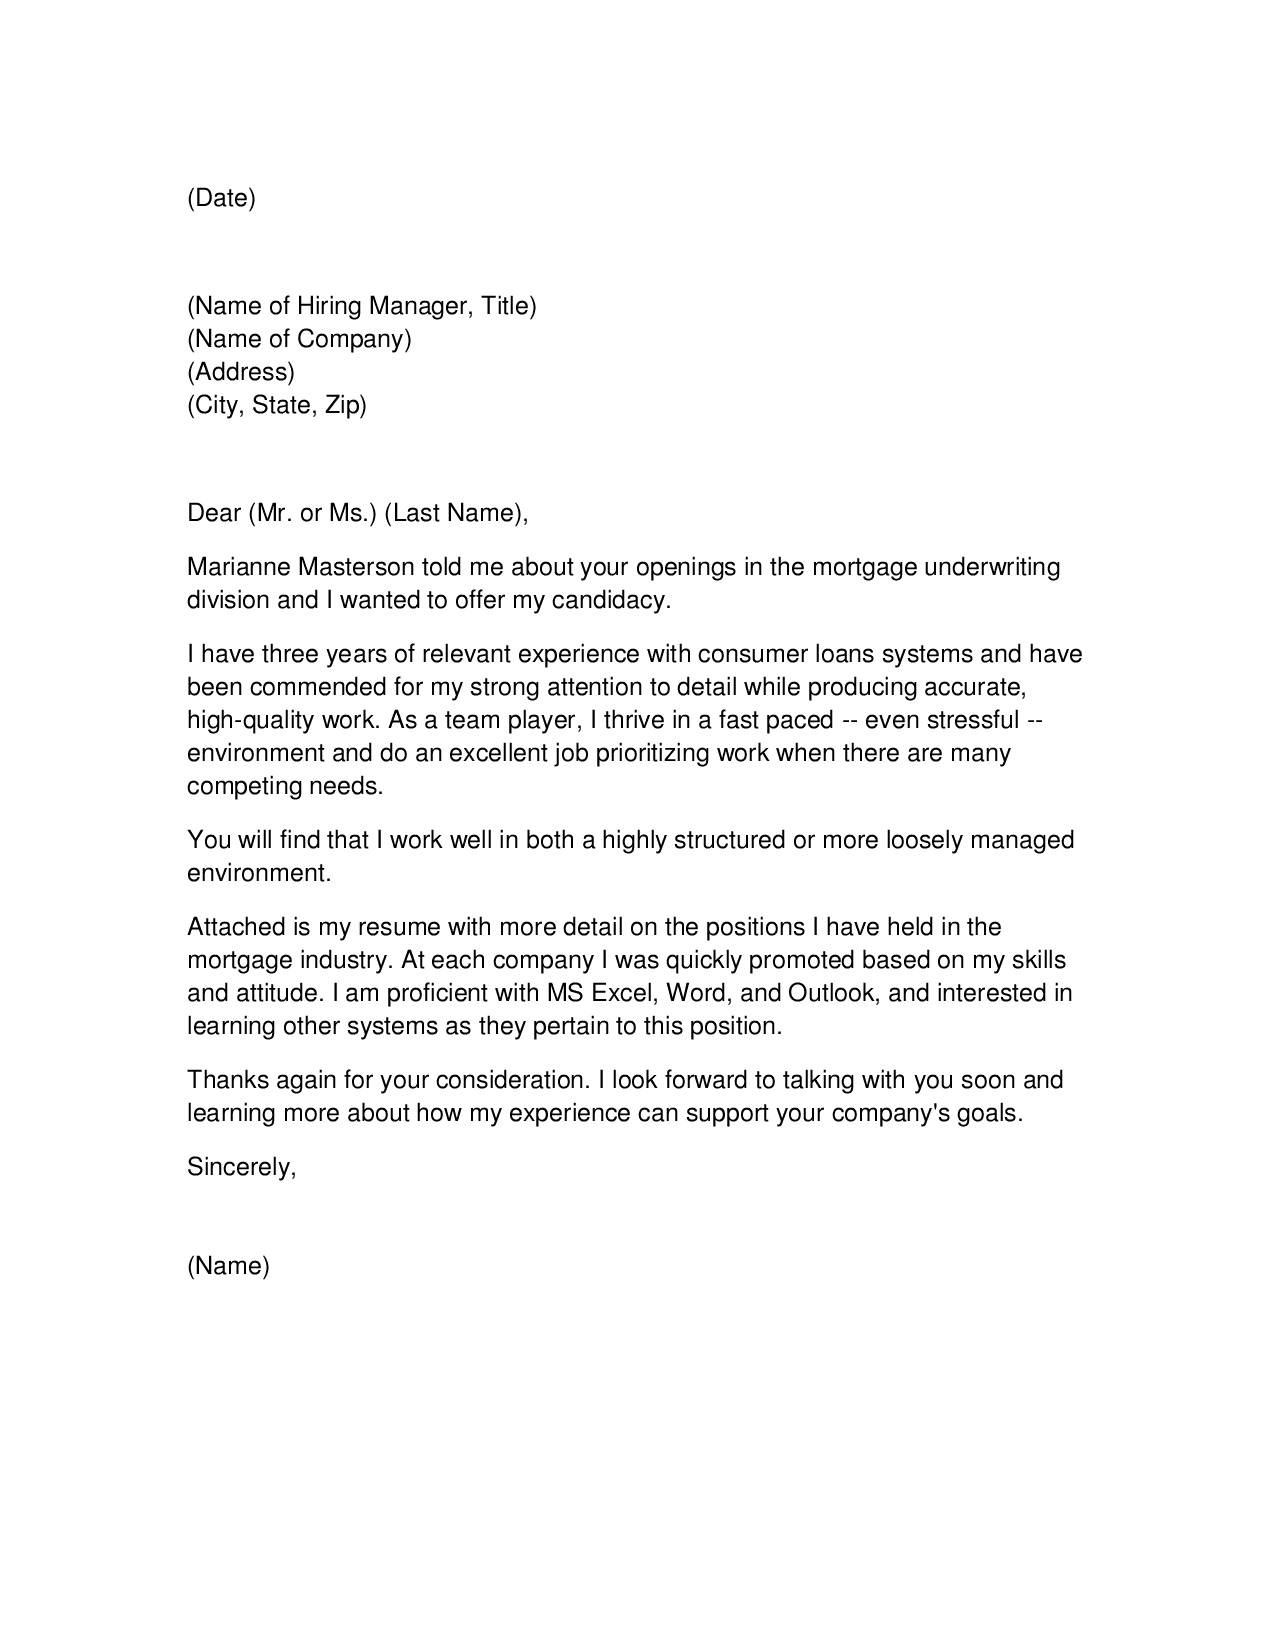 TEXT VERSION OF THE MORTGAGE UNDERWRITER COVER LETTER SAMPLE